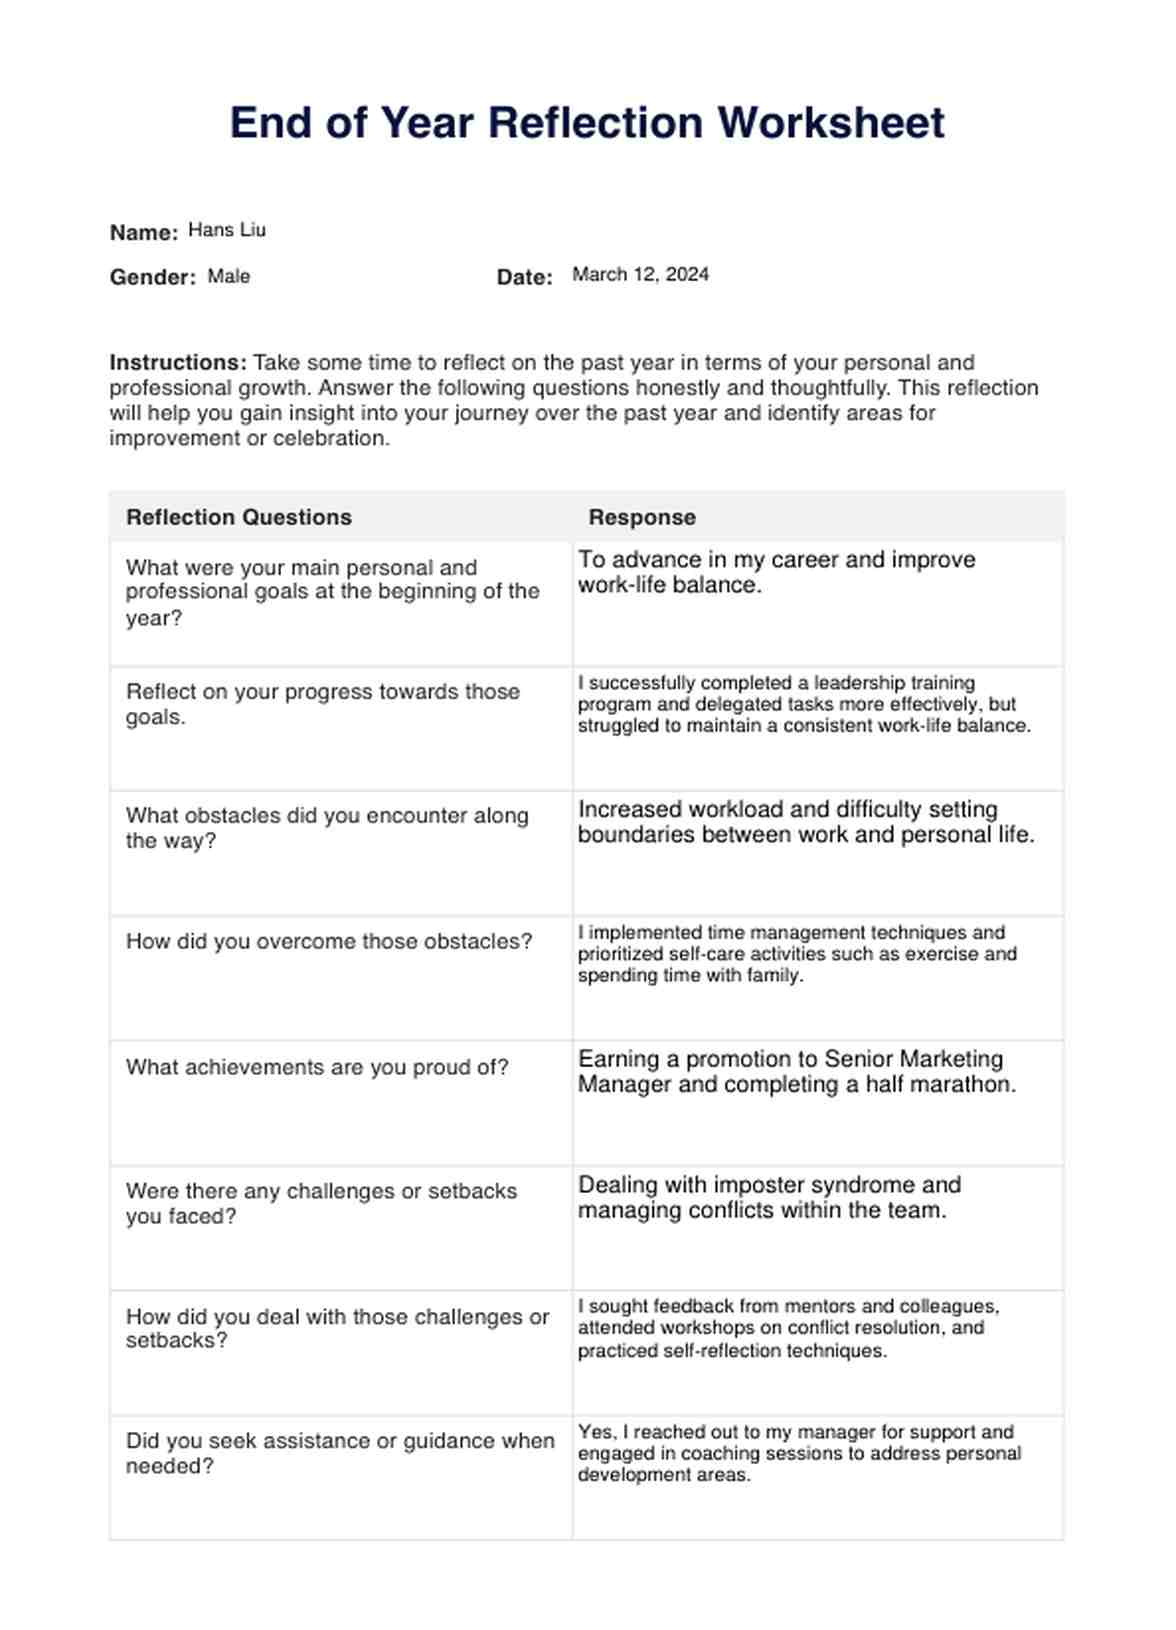 End-of-Year Reflection Worksheet PDF PDF Example